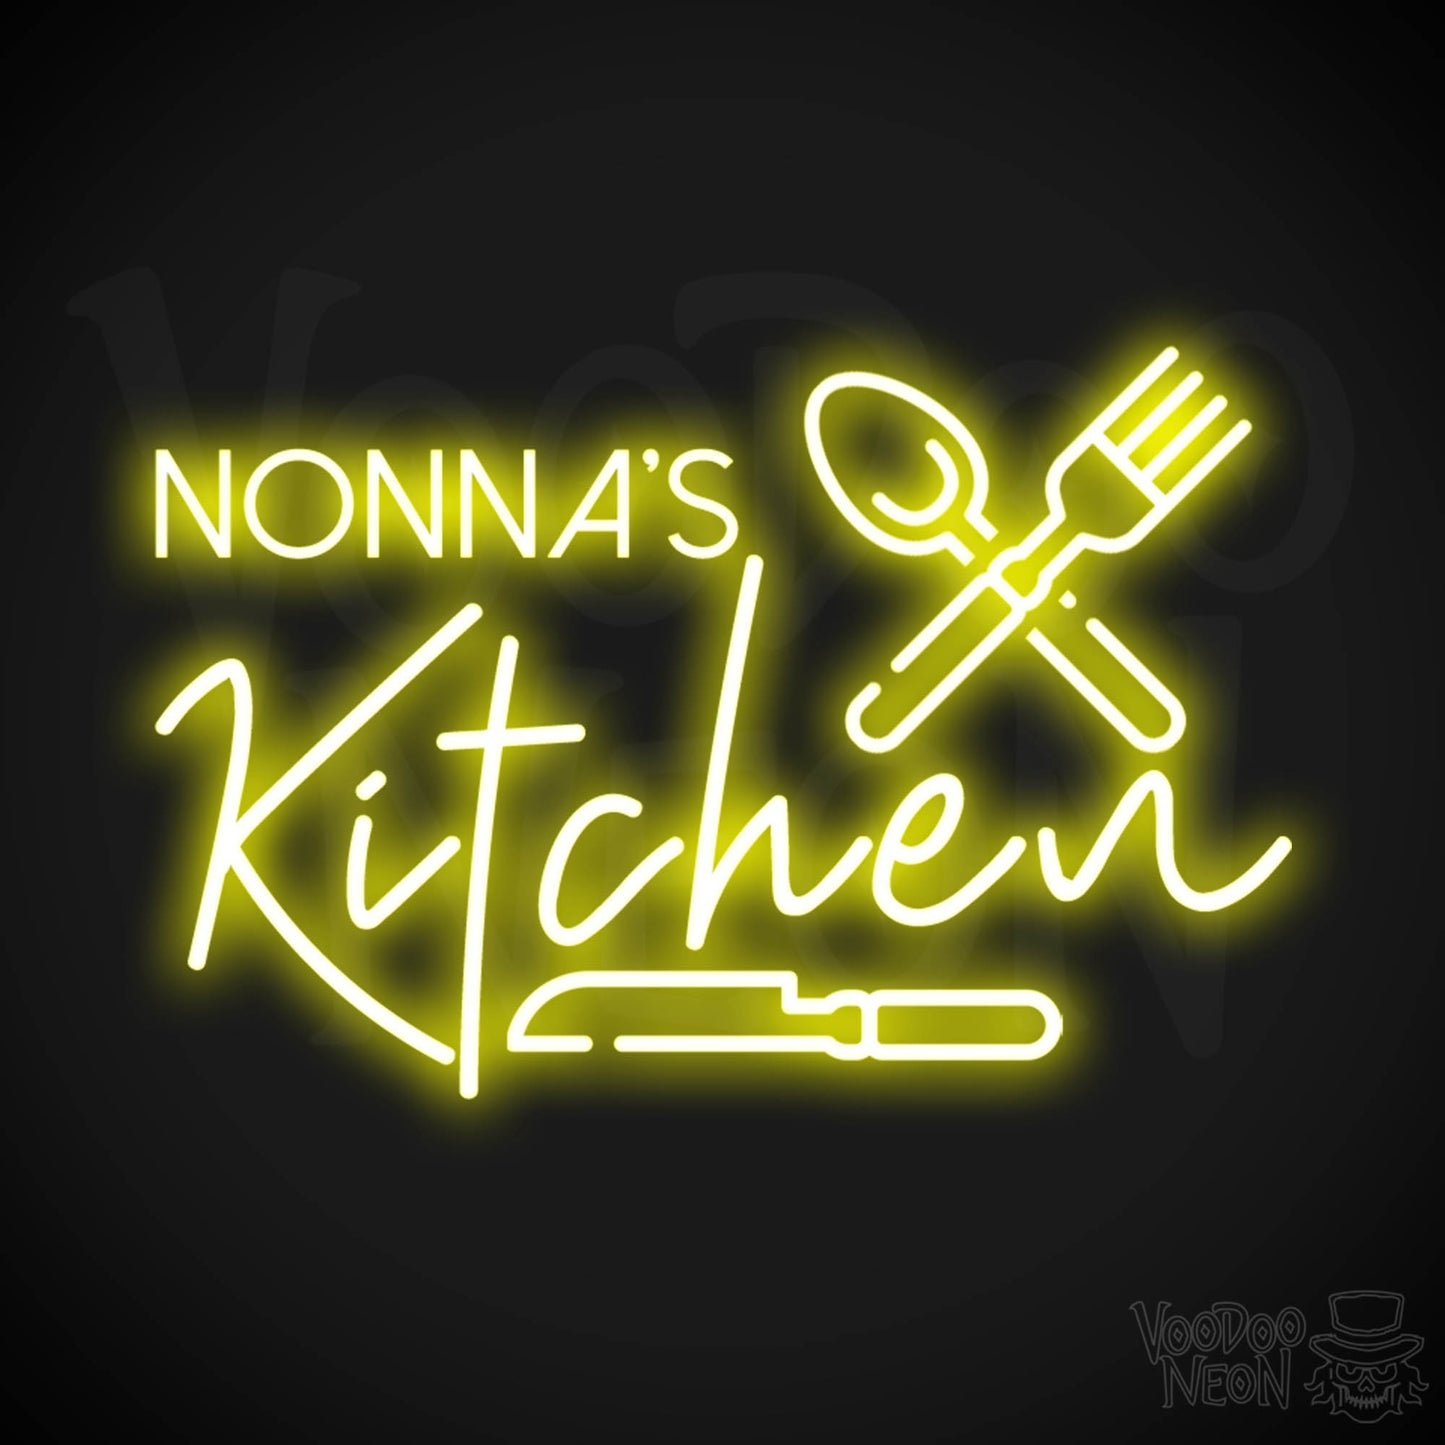 Nonna's Kitchen Neon Sign - Neon Nona's Kitchen Sign - Wall Art - Color Yellow